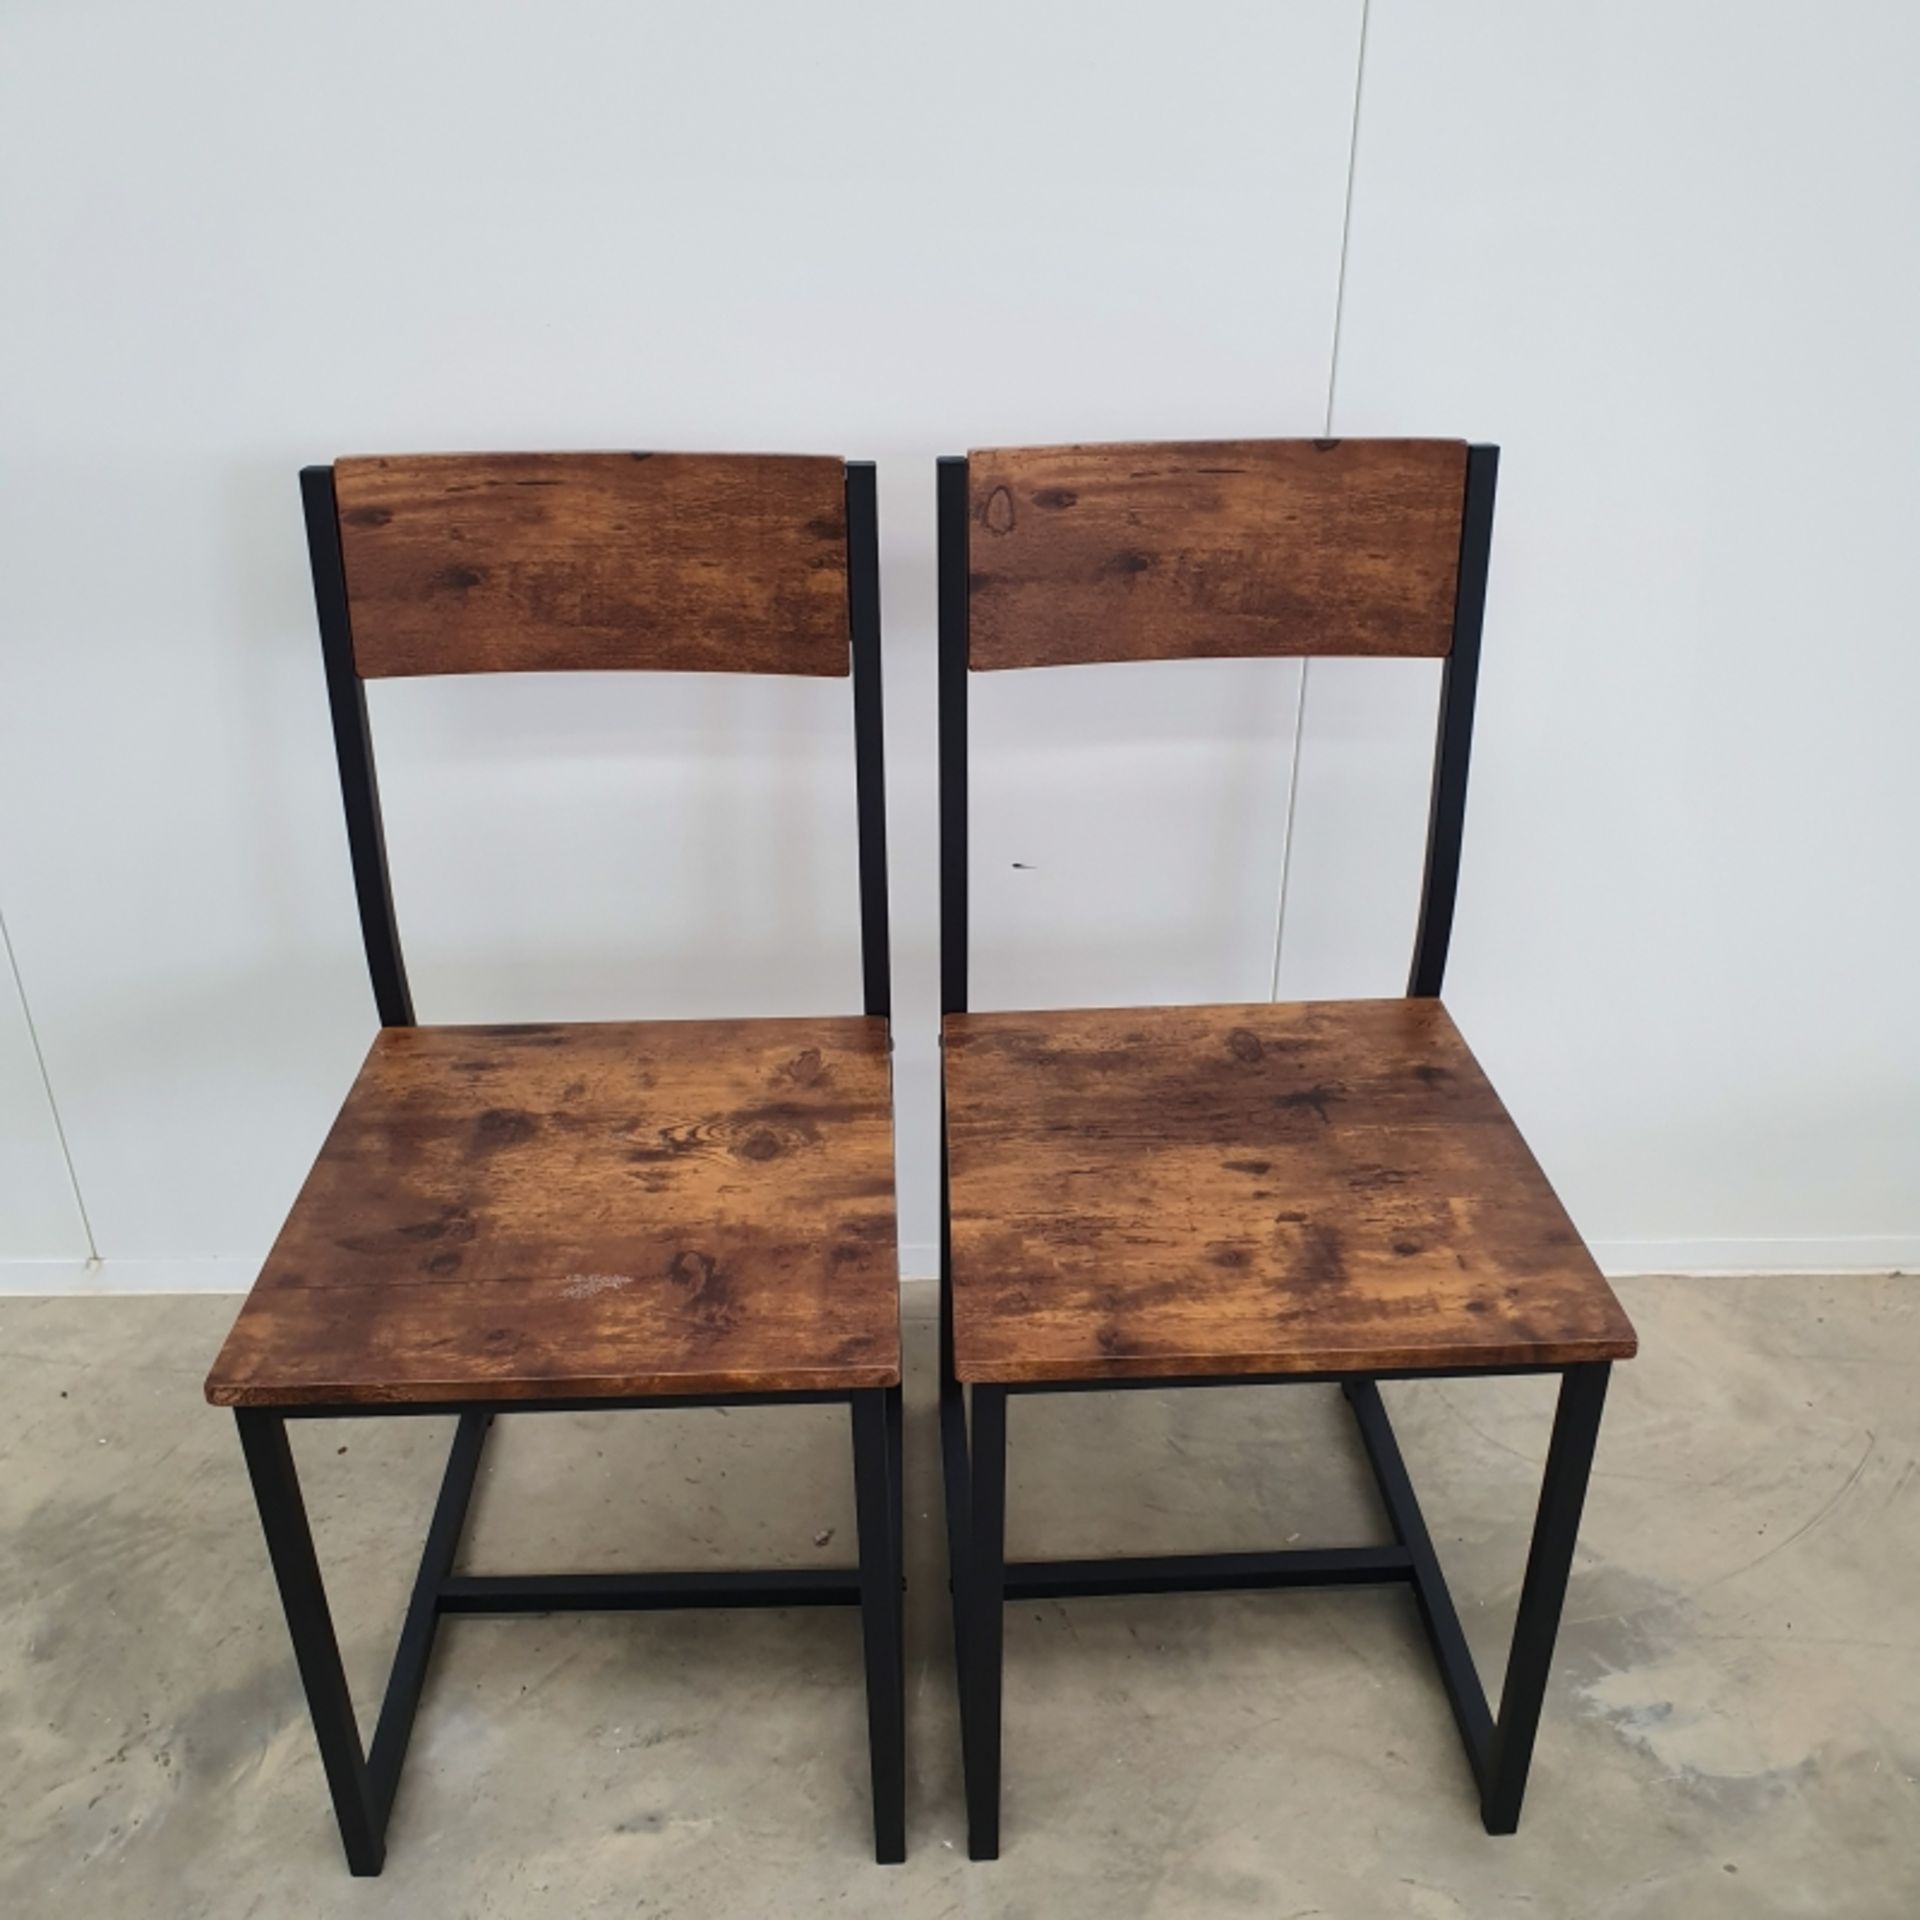 RUSTIC CHAIRS SET OF 2, RRP £120 *NO VAT*